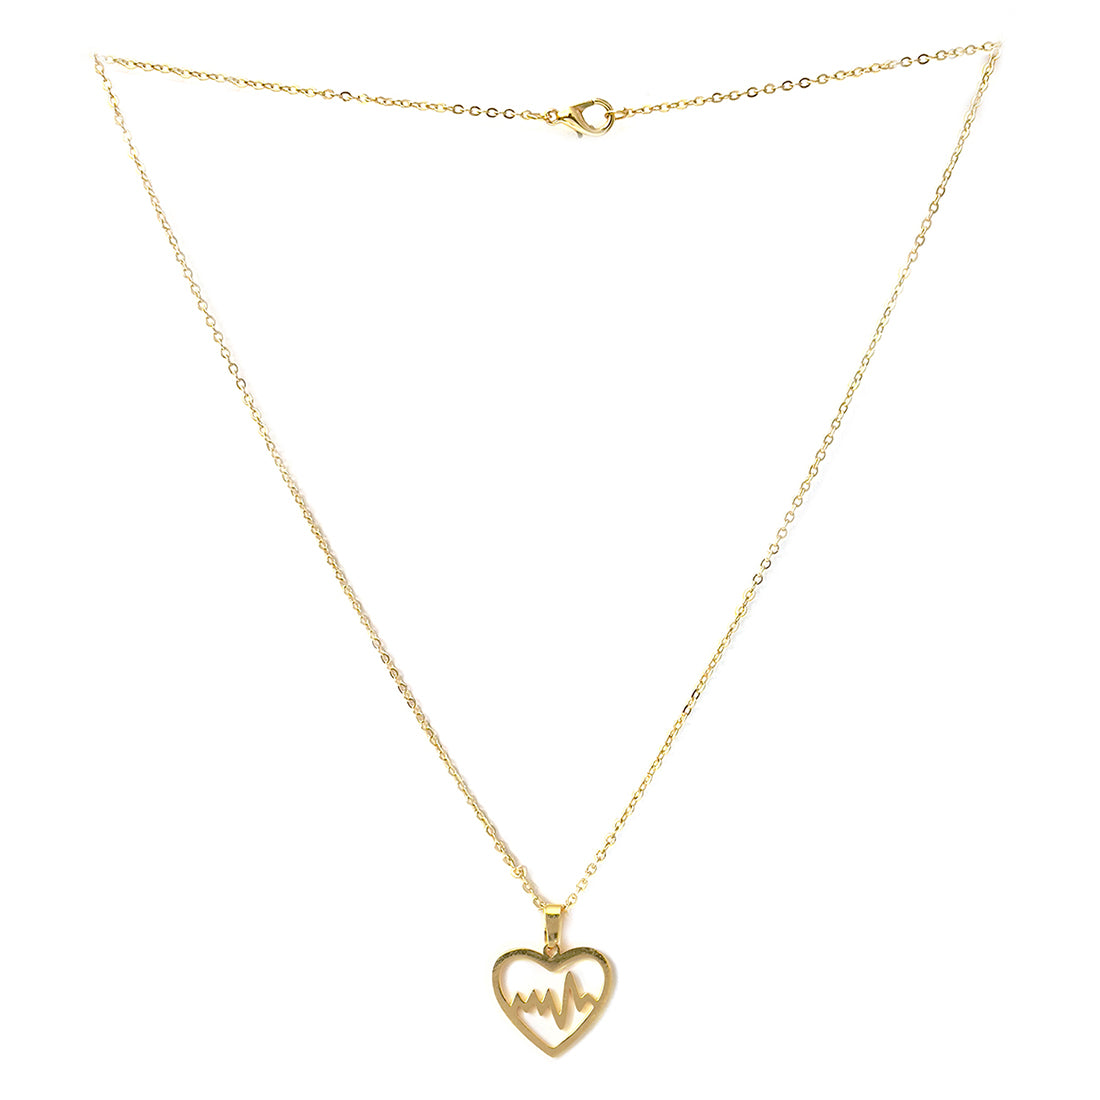 SET OF TWO HEARTBEAT GOLD-TONED PENDANT NECKLACE & EARRINGS SET